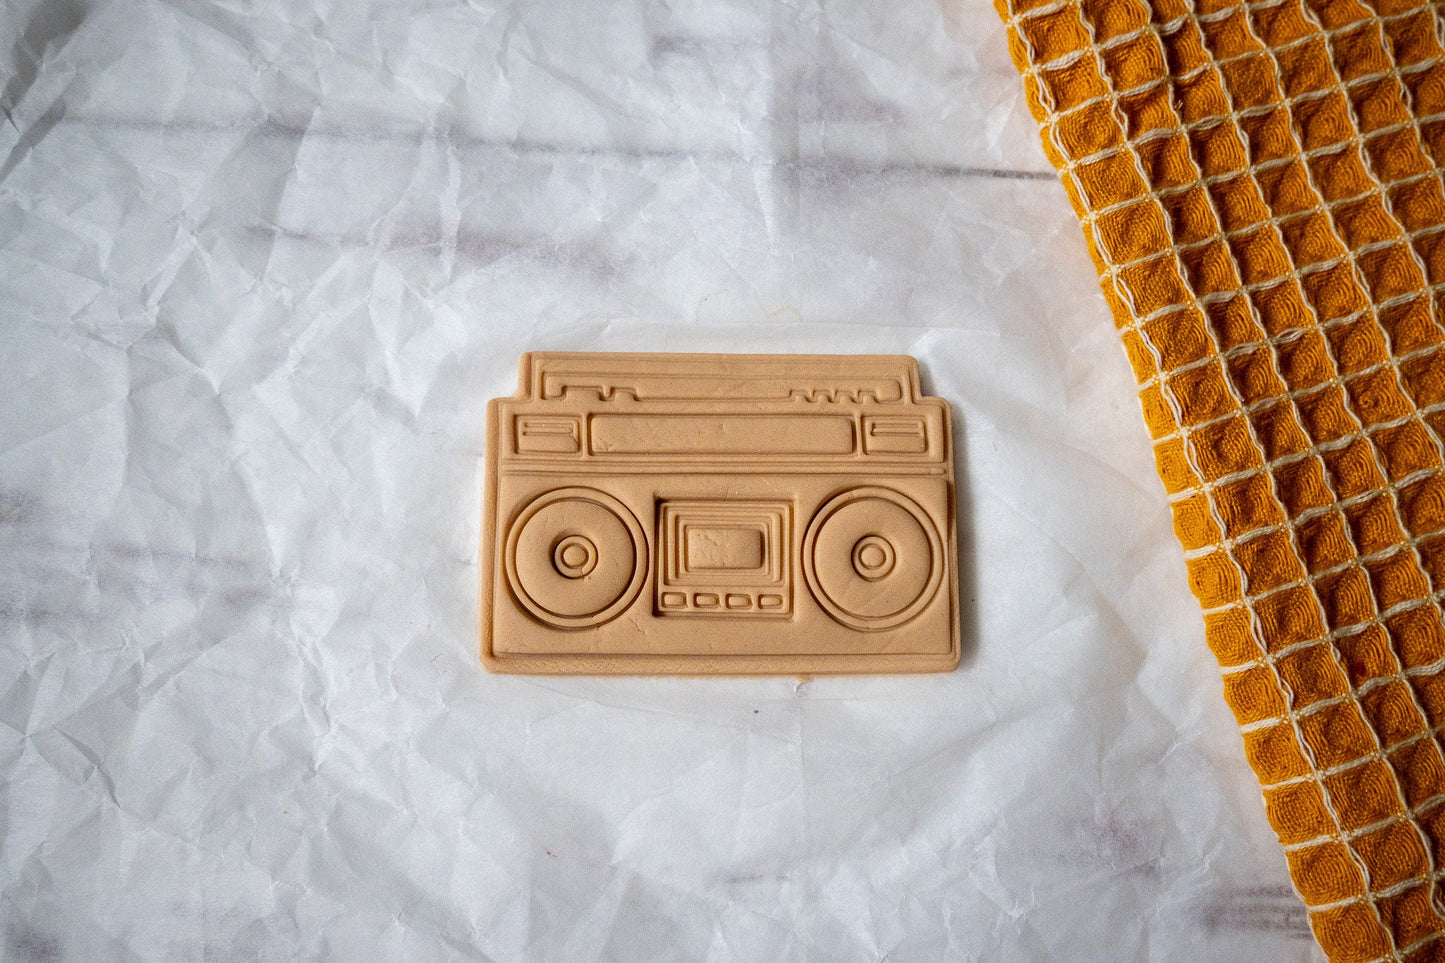 3D Printed Vintage Boombox Stamp Cookie Cutter Set